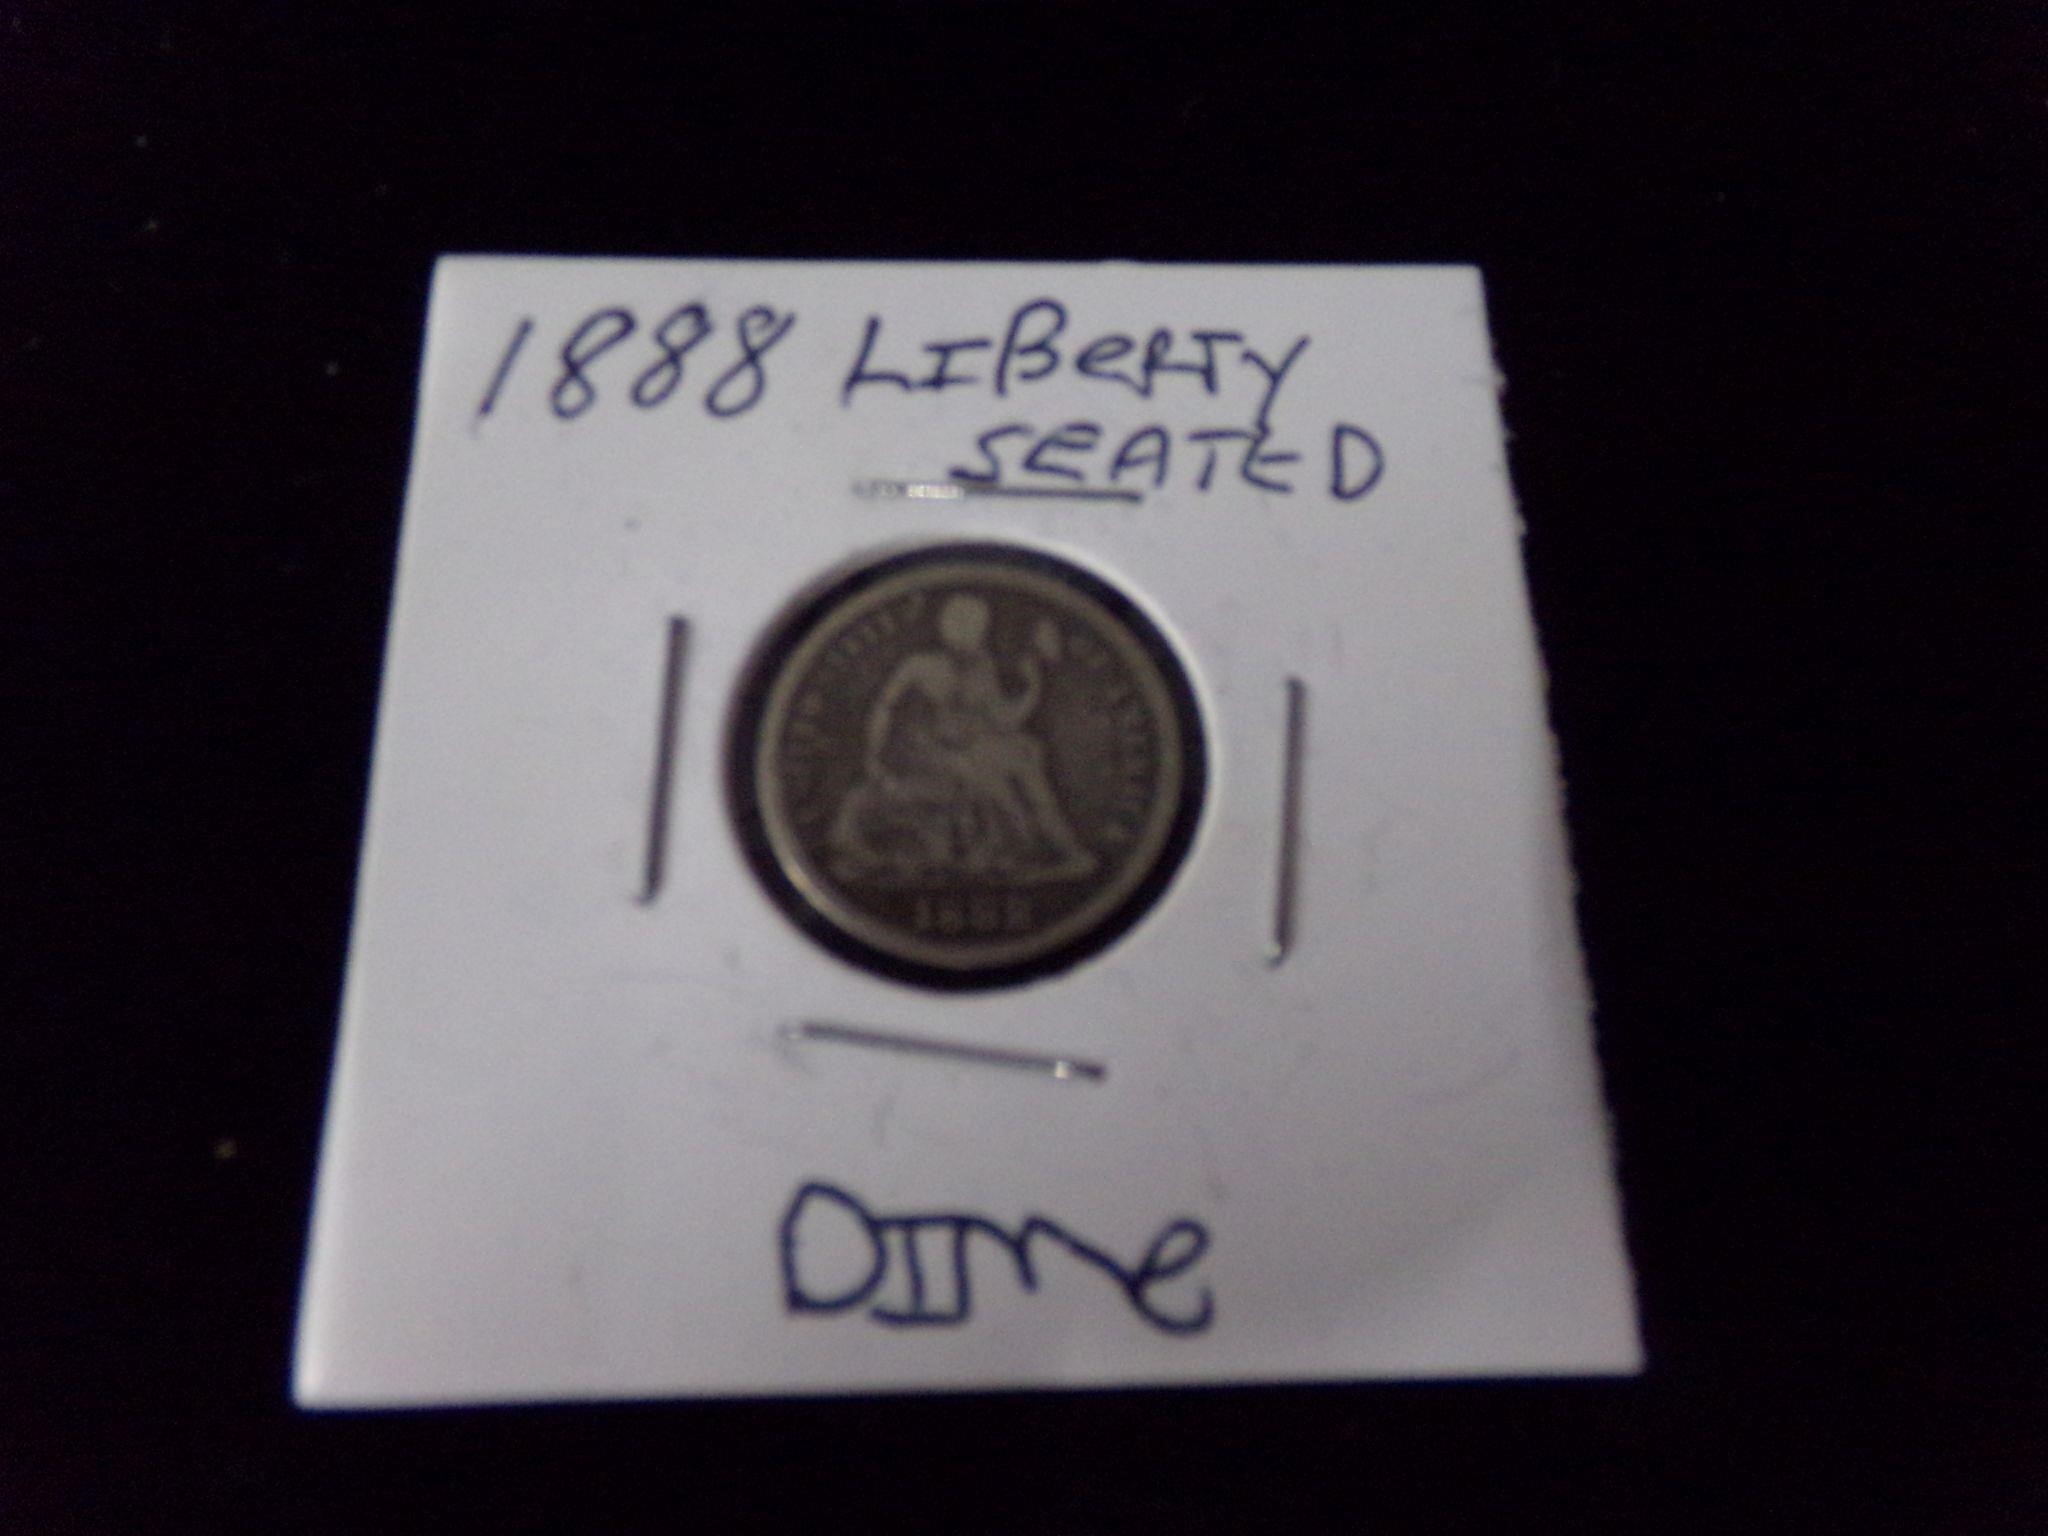 1888 Silver Liberty seated Dime